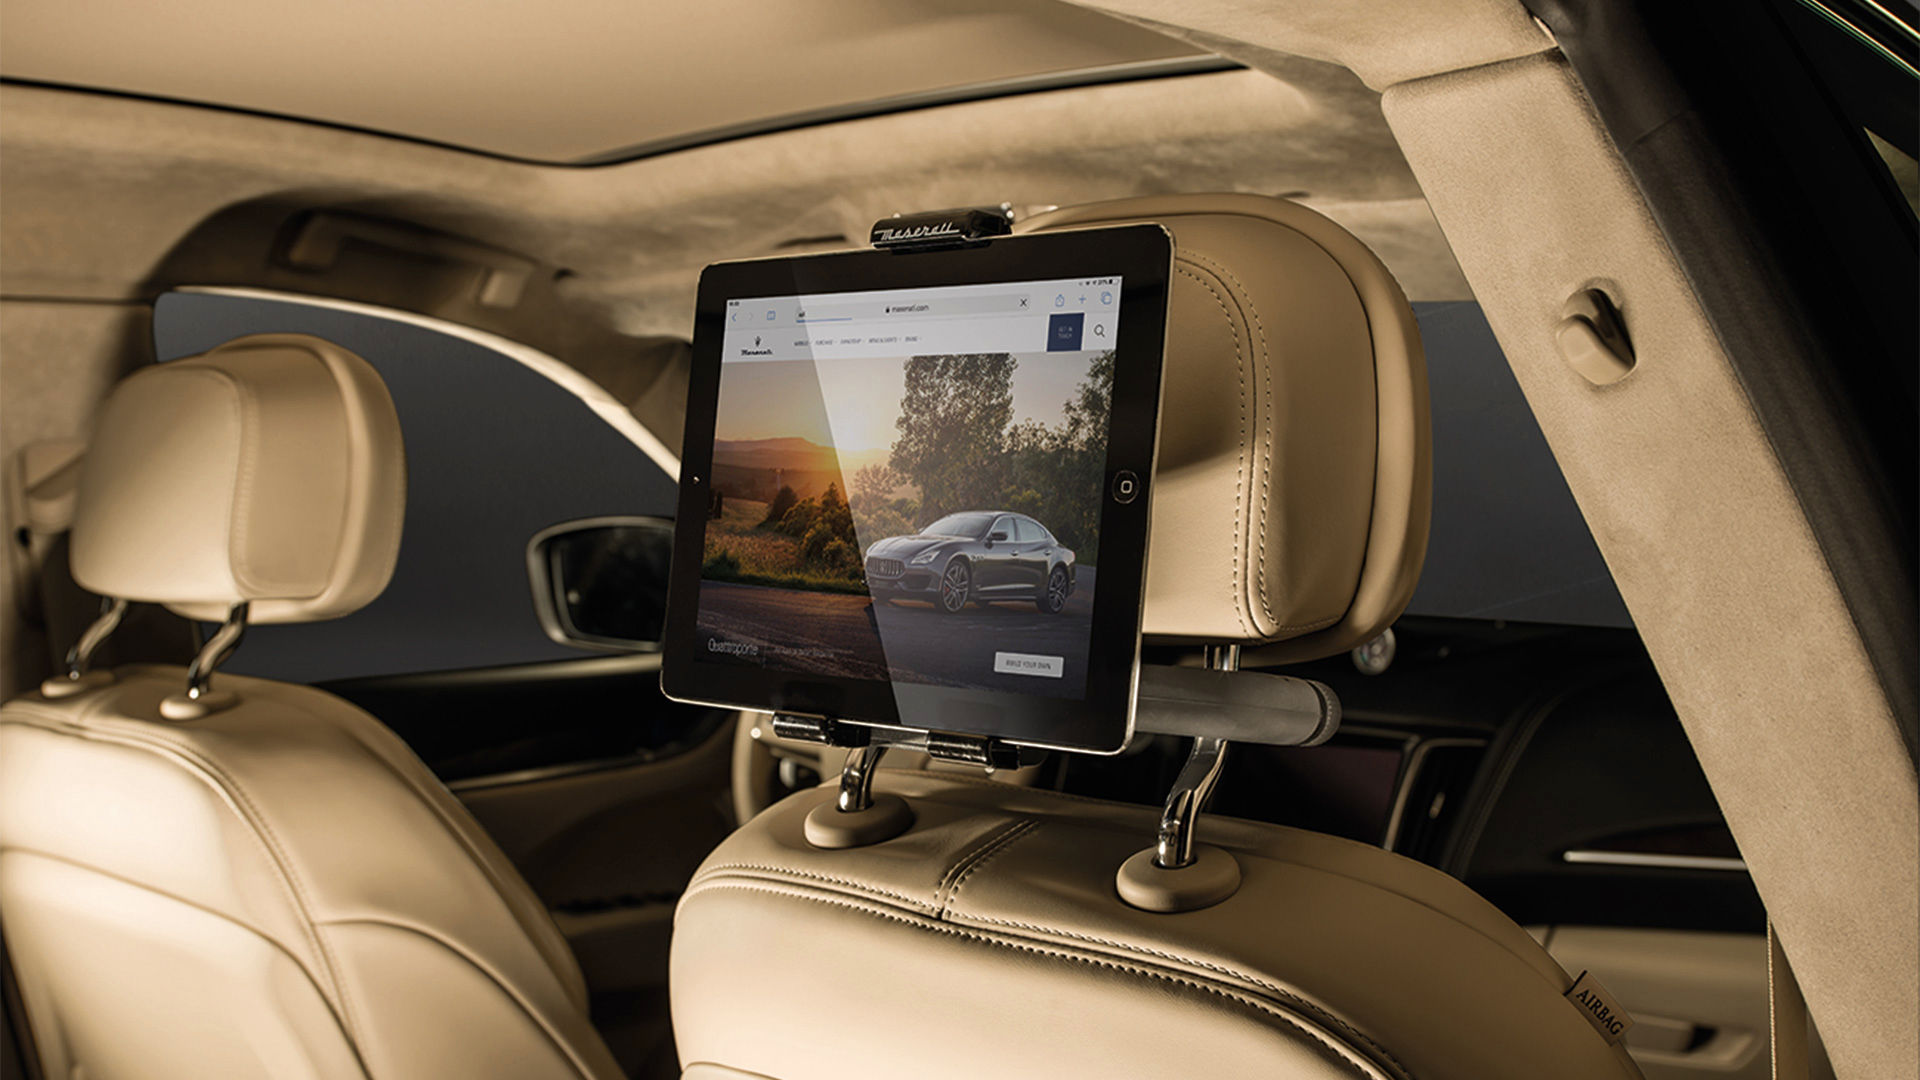 Support for tablets and tablets inside the Maserati Quattroporte